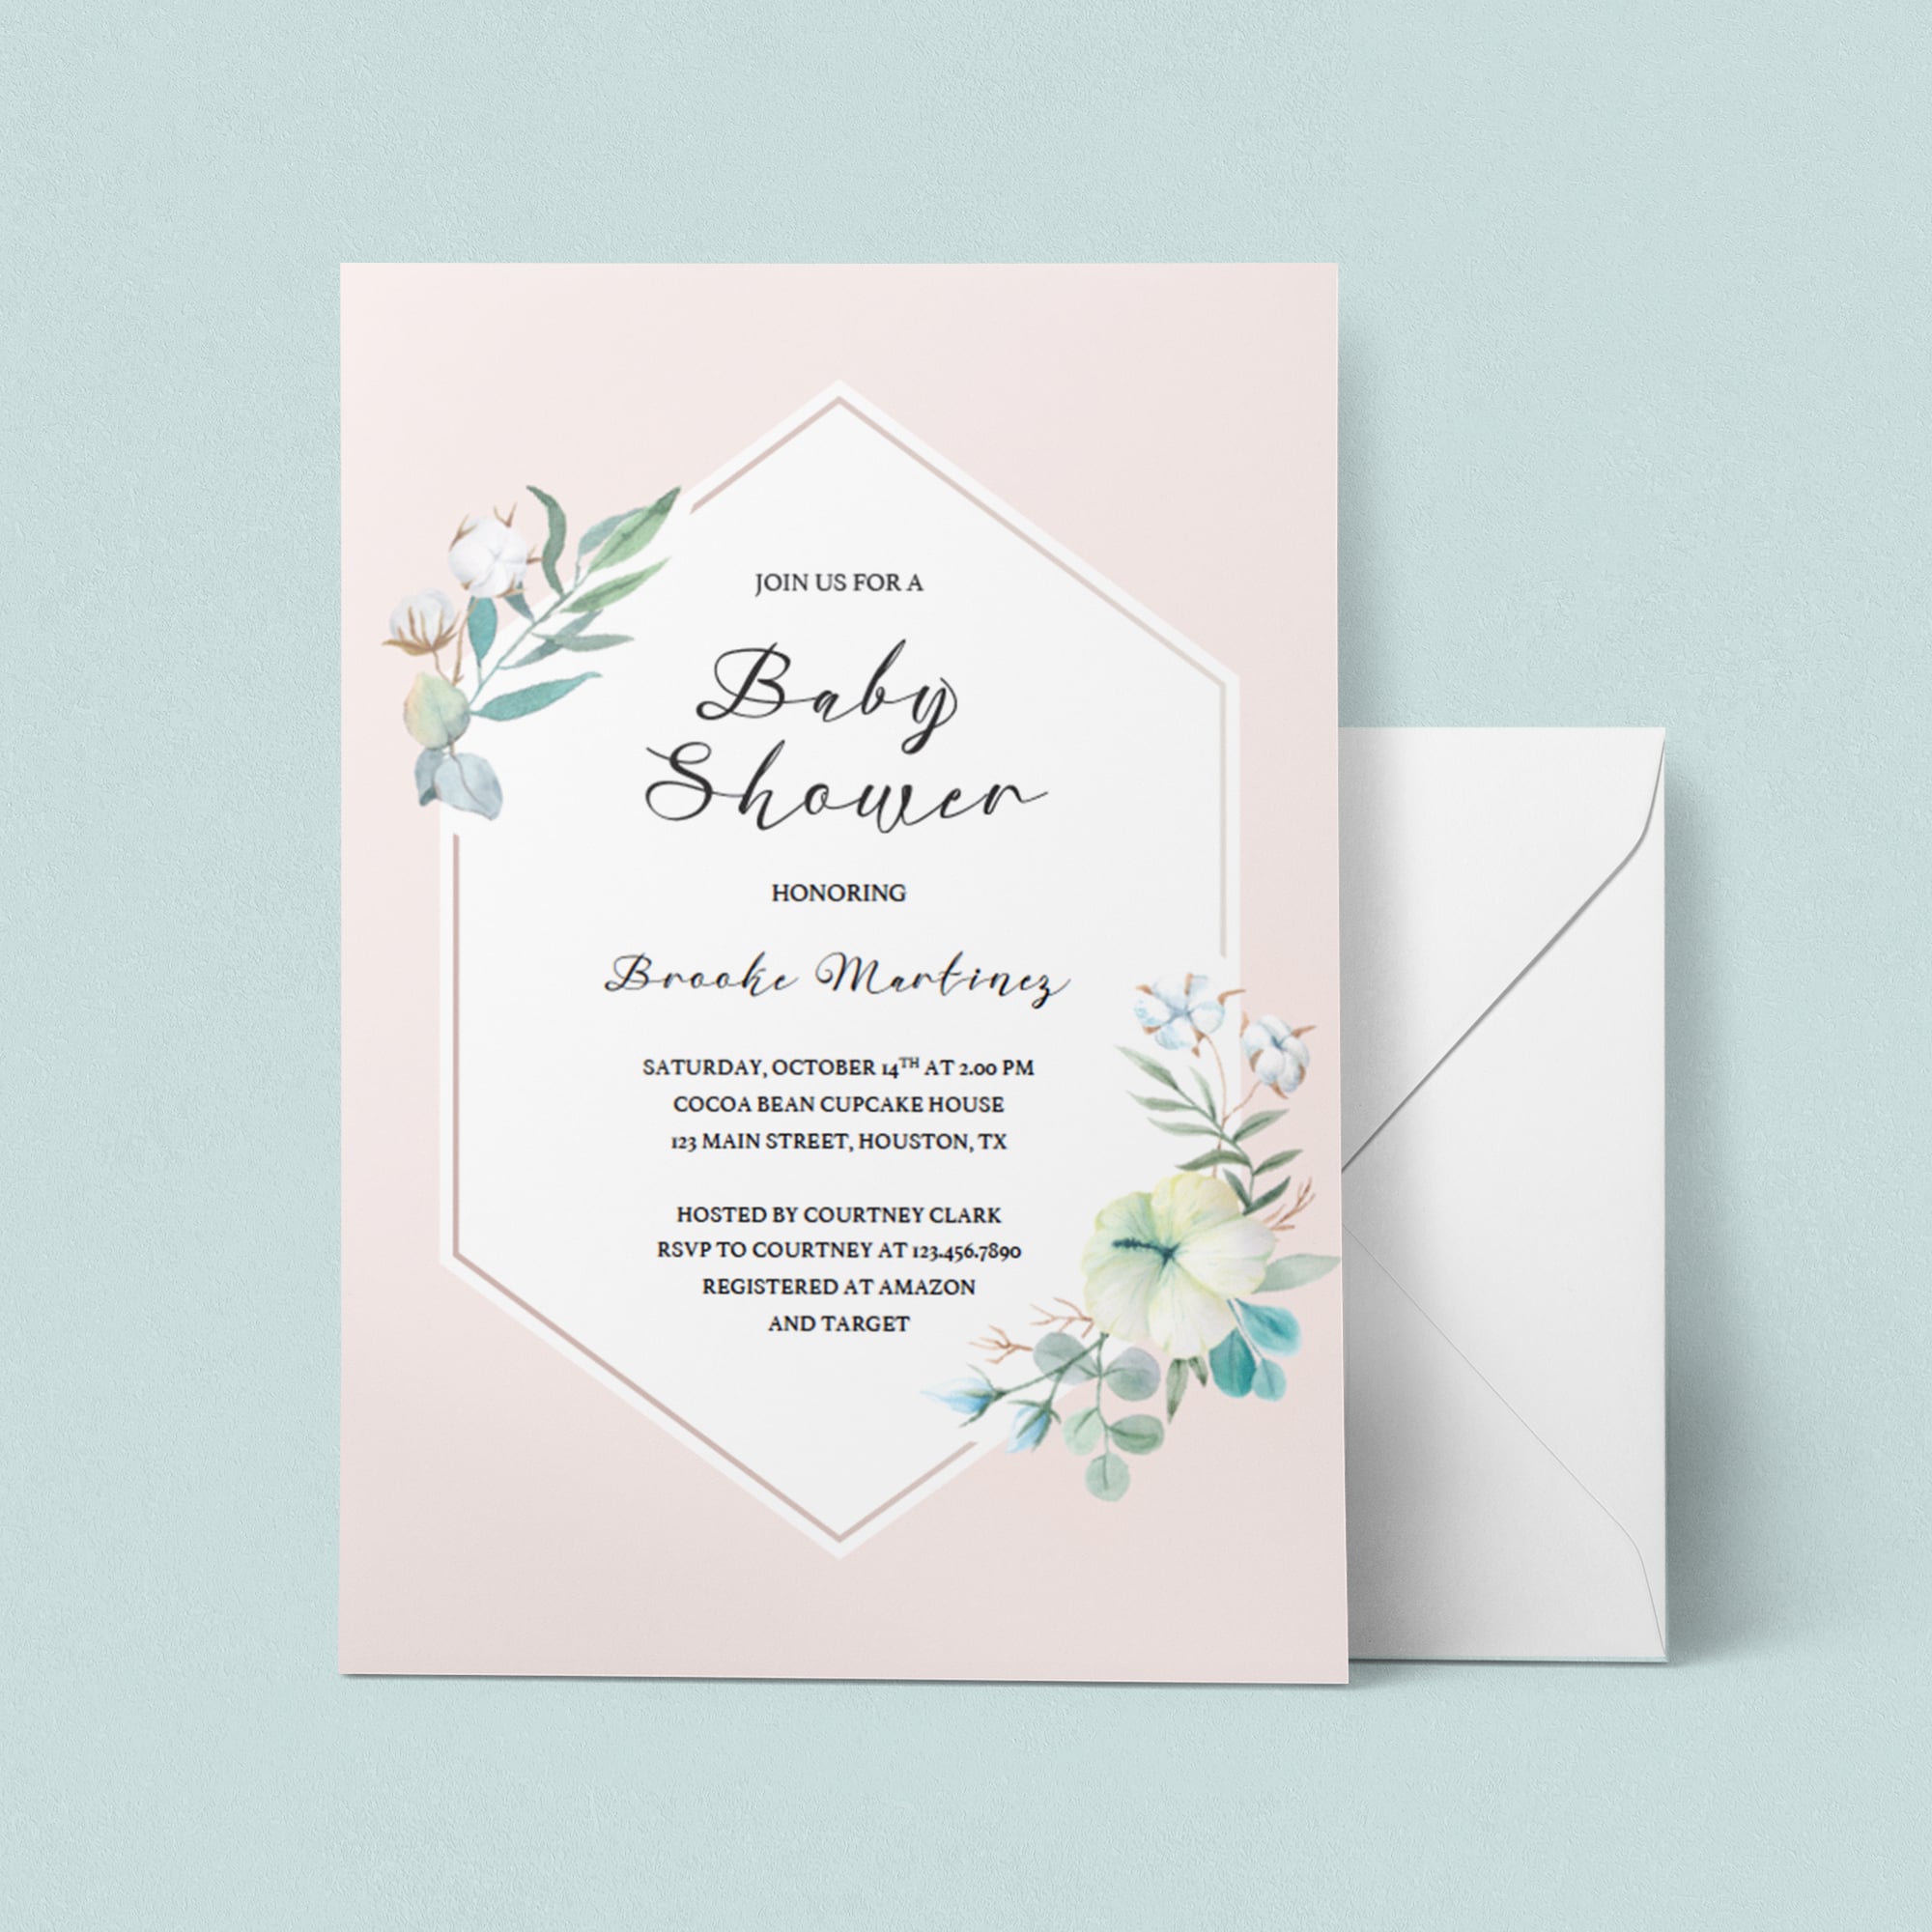 Watercolor flowers on blush baby sprinkle invitation by LittleSizzle